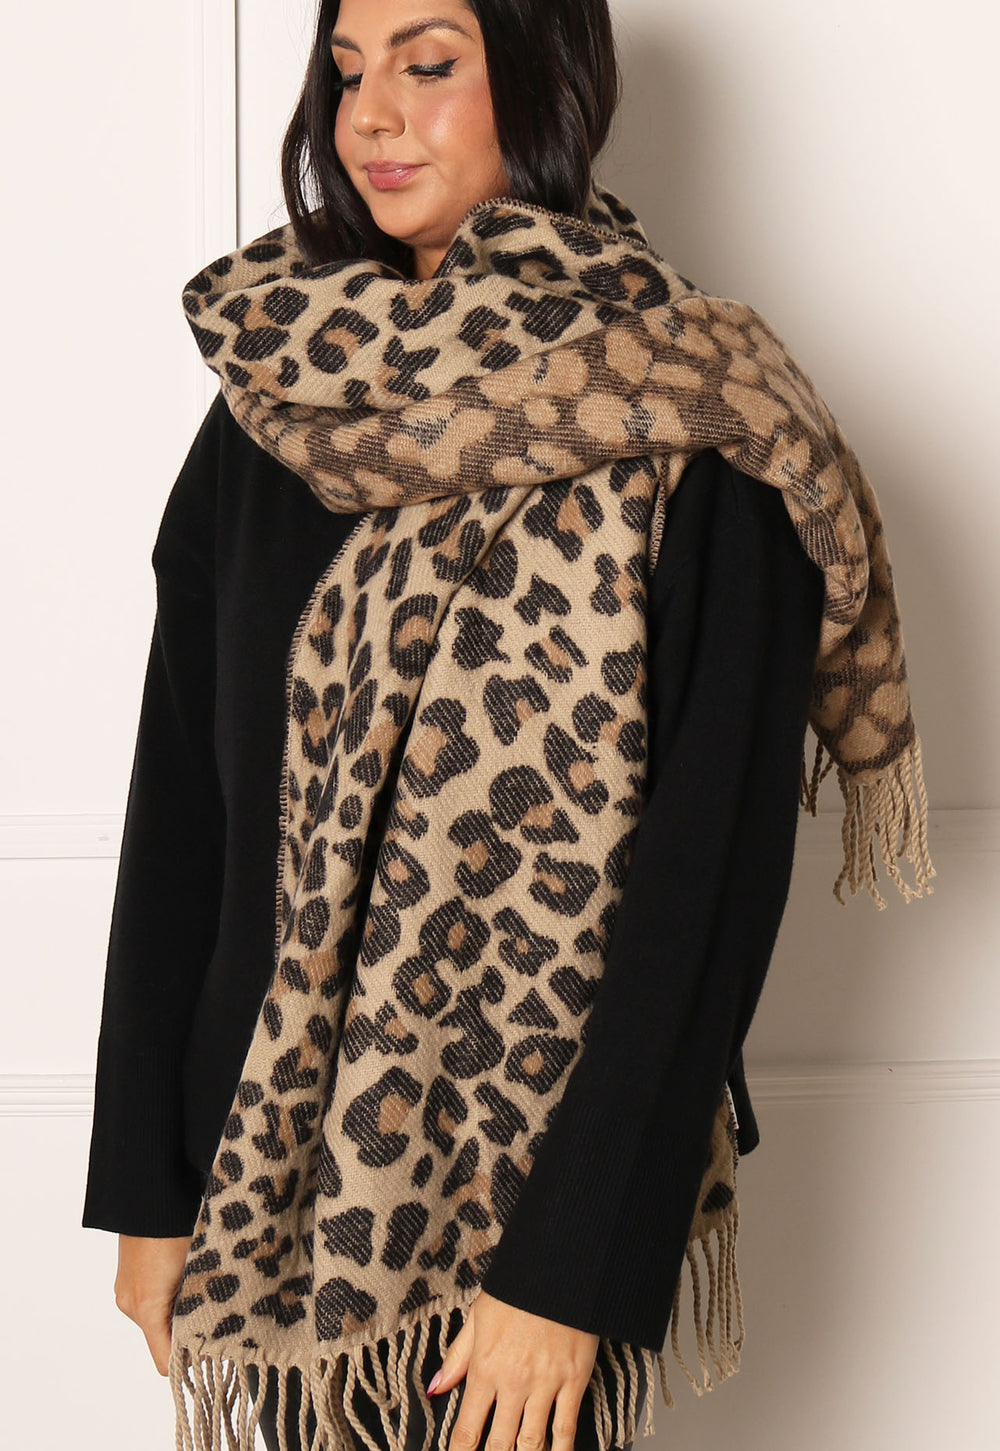 PIECES Leopard Print Oversized Brushed Scarf with Tassels in Beige, Black & Camel - One Nation Clothing